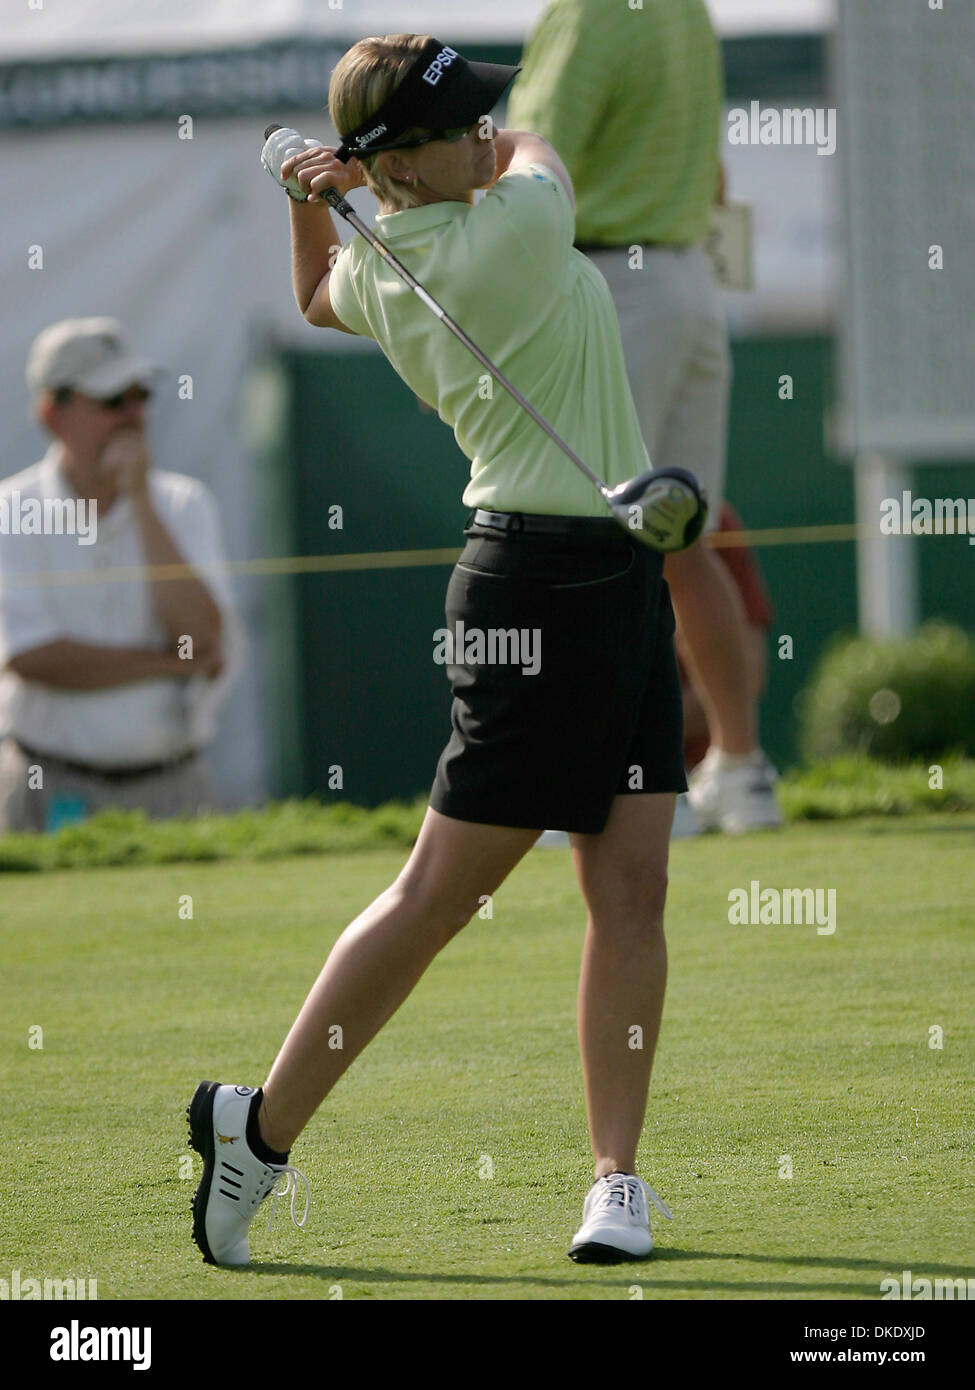 Jun 08, 2007 - Havre de Grace, Maryland, USA - Bulle Rock Golf Course:  KARRIE WEBB tees off at the first hole during the first round of the McDonalds LPGA Championship.  Webb finished the day at 4 under par and is currently tied for 4th after round 1.  (Credit Image: © James Berglie/ZUMA Press) Stock Photo